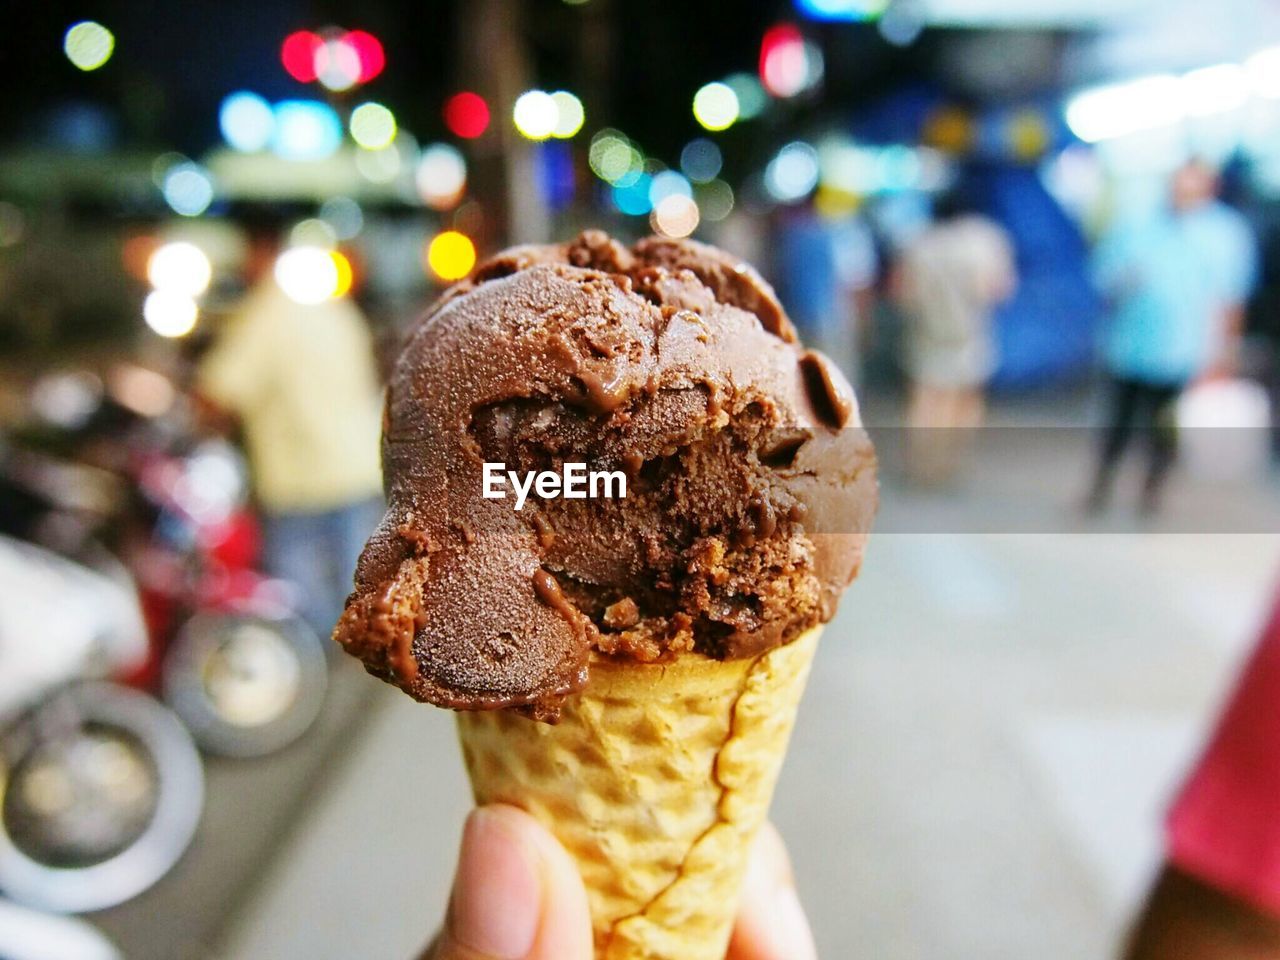 Close-up of person hand holding chocolate ice cream cone